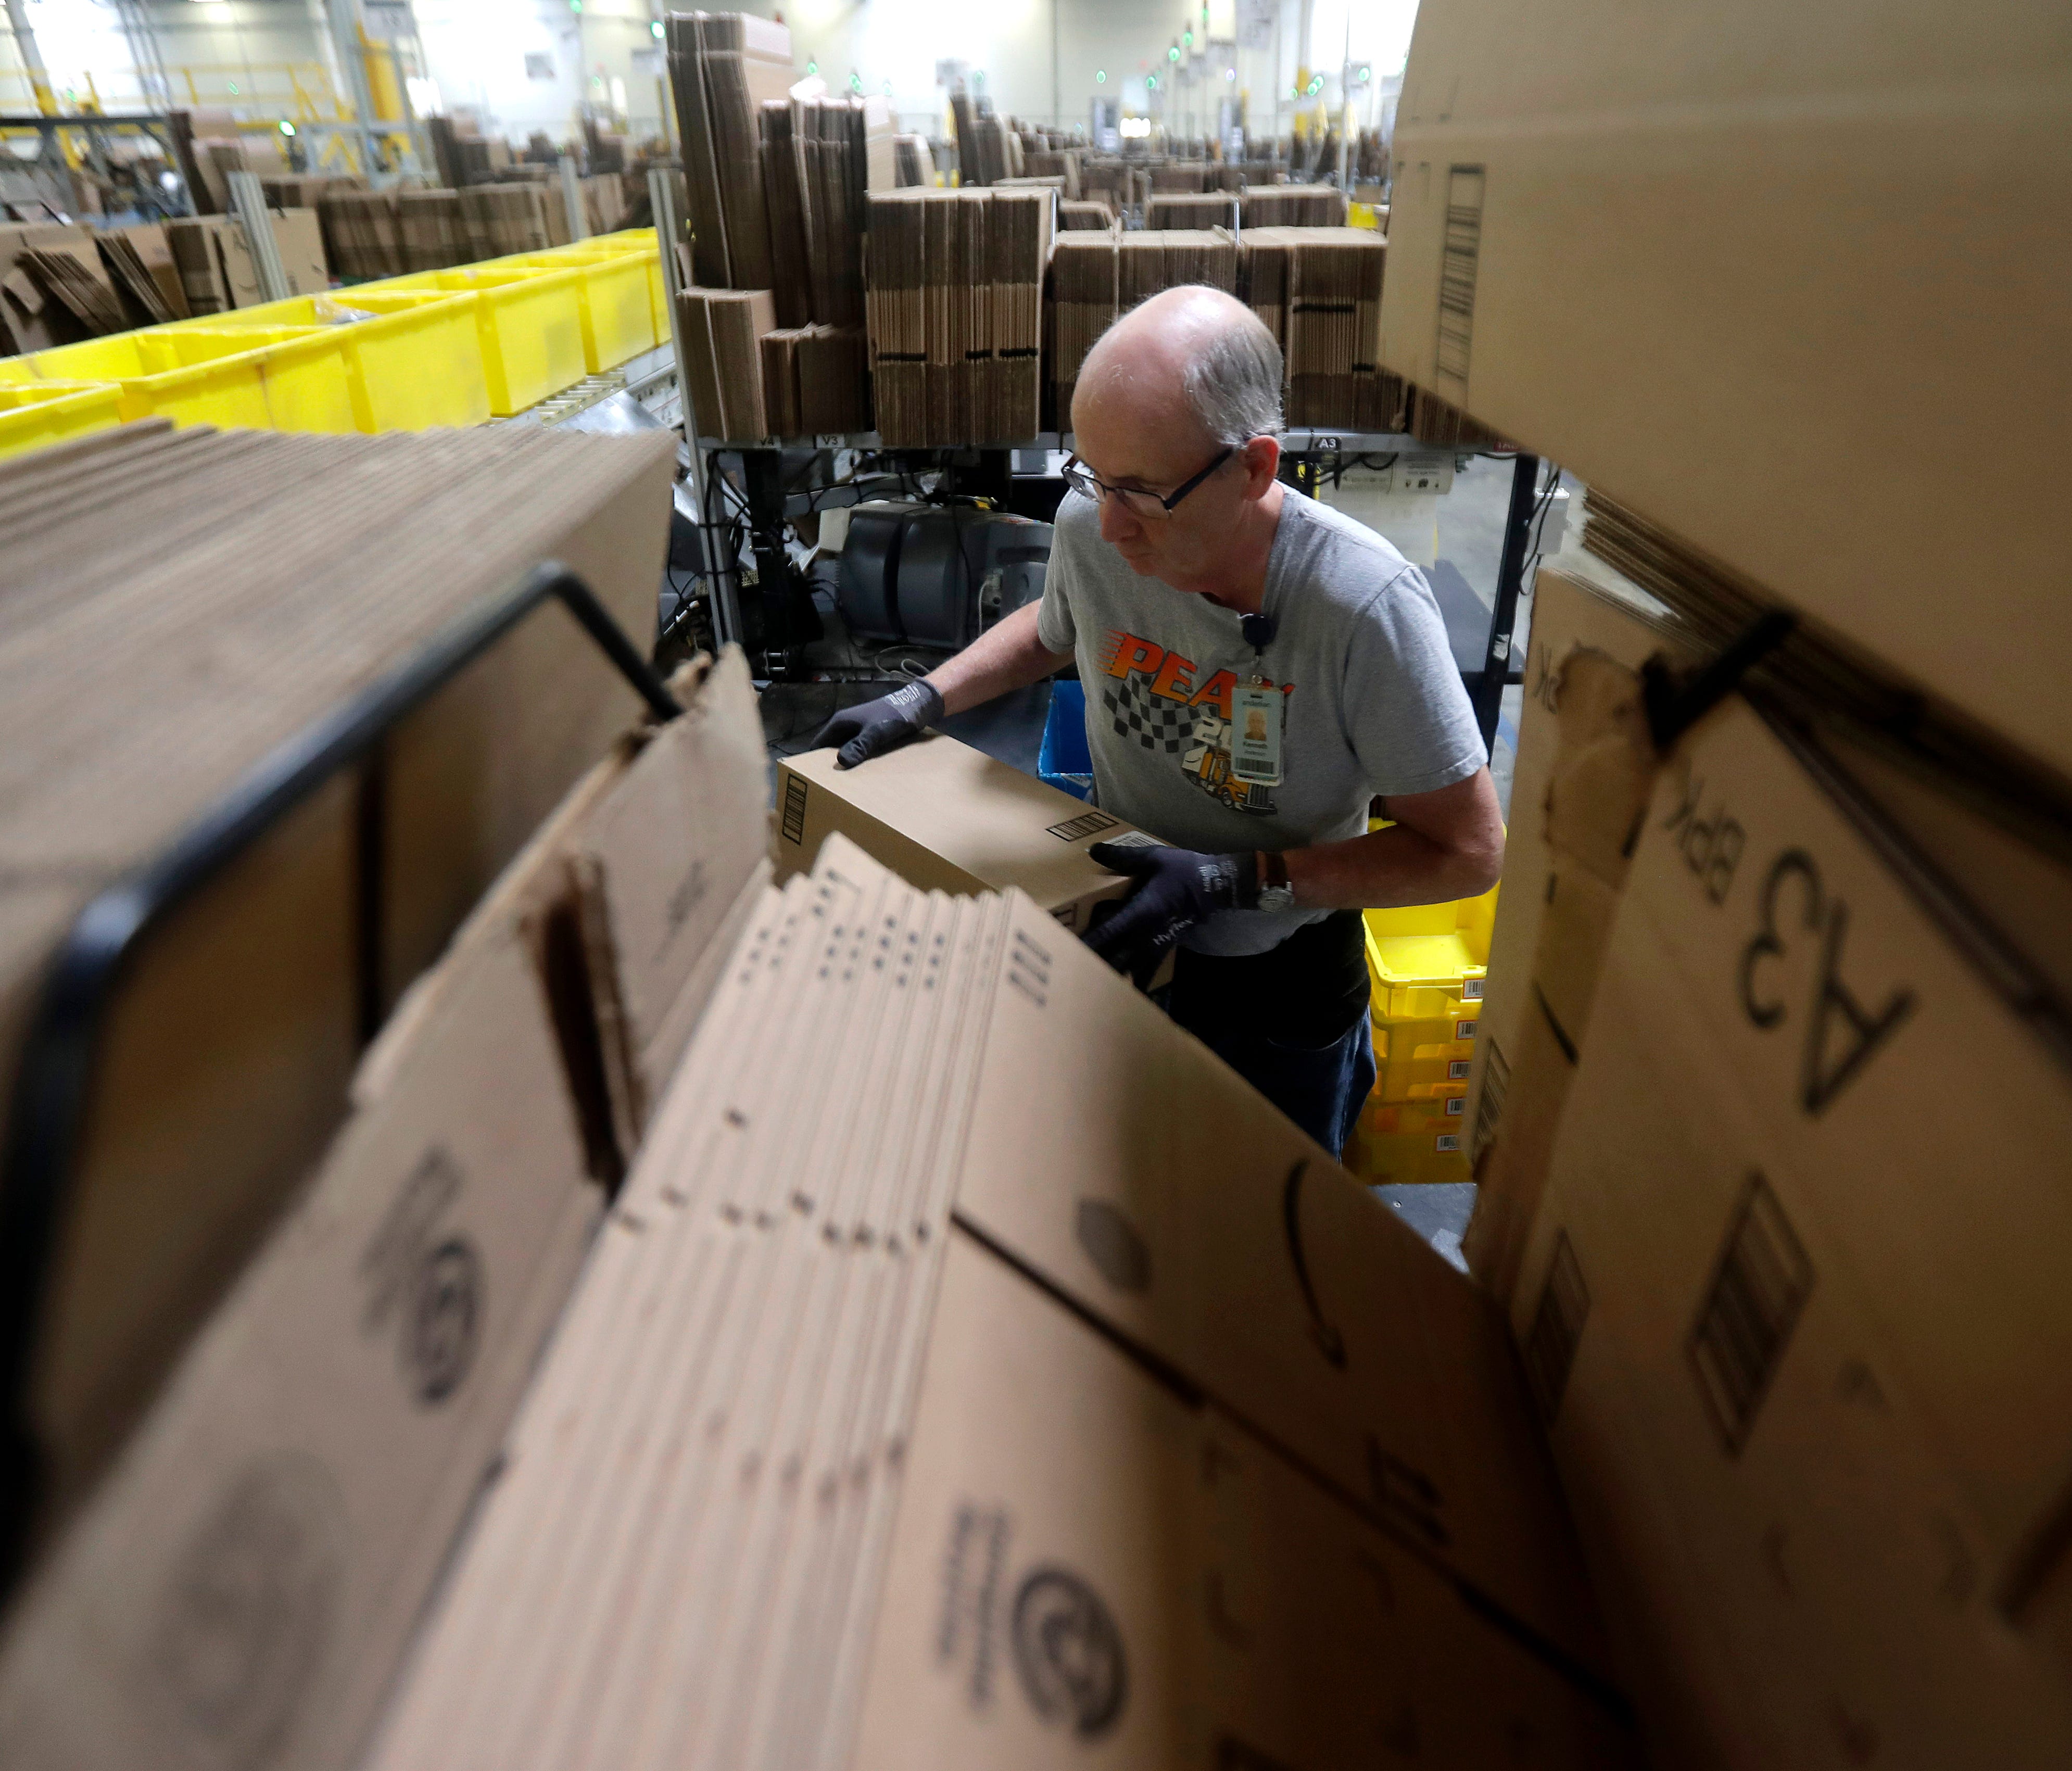 In this Tuesday, Aug. 1, 2017, photo, Amazon employee Kenneth Anderson loads boxes at the Amazon Fulfillment center in Robbinsville Township, N.J. Amazon is holding a giant job fair Wednesday, Aug. 2, and plans to make thousands of job offers on the 